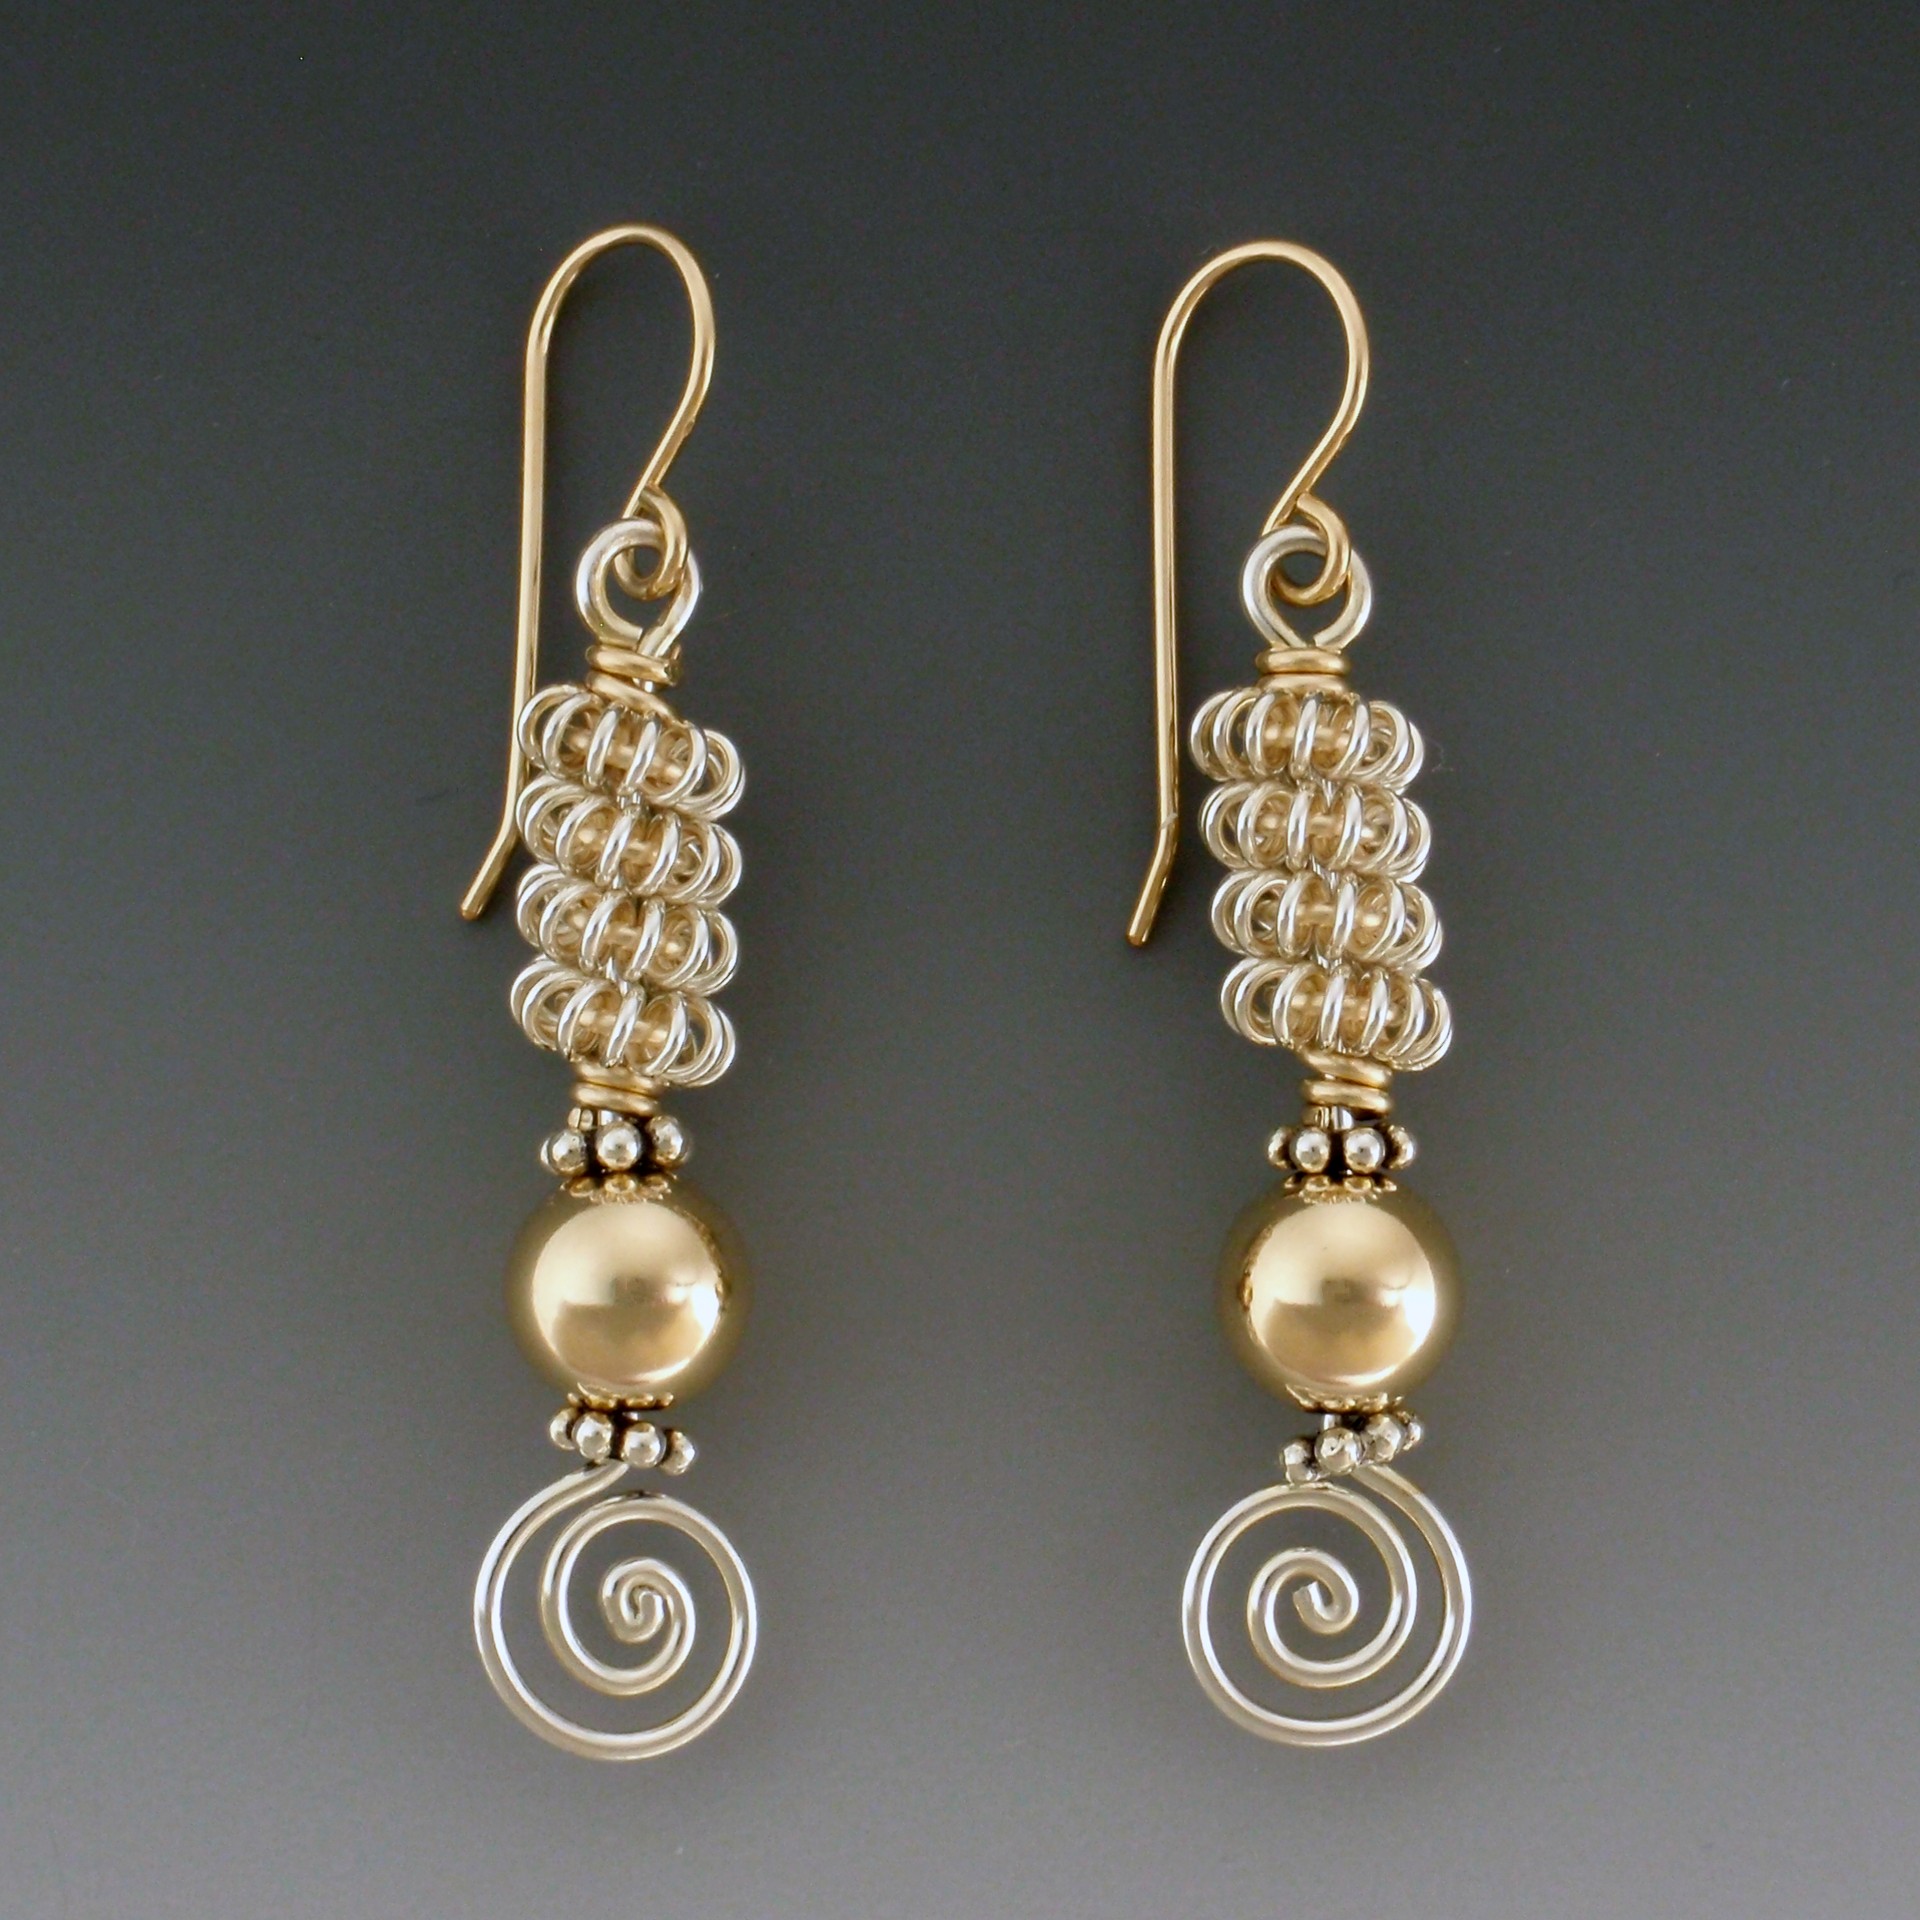 Silver and Gold Earrings for Sale - BJChrsitan Designs Online Store